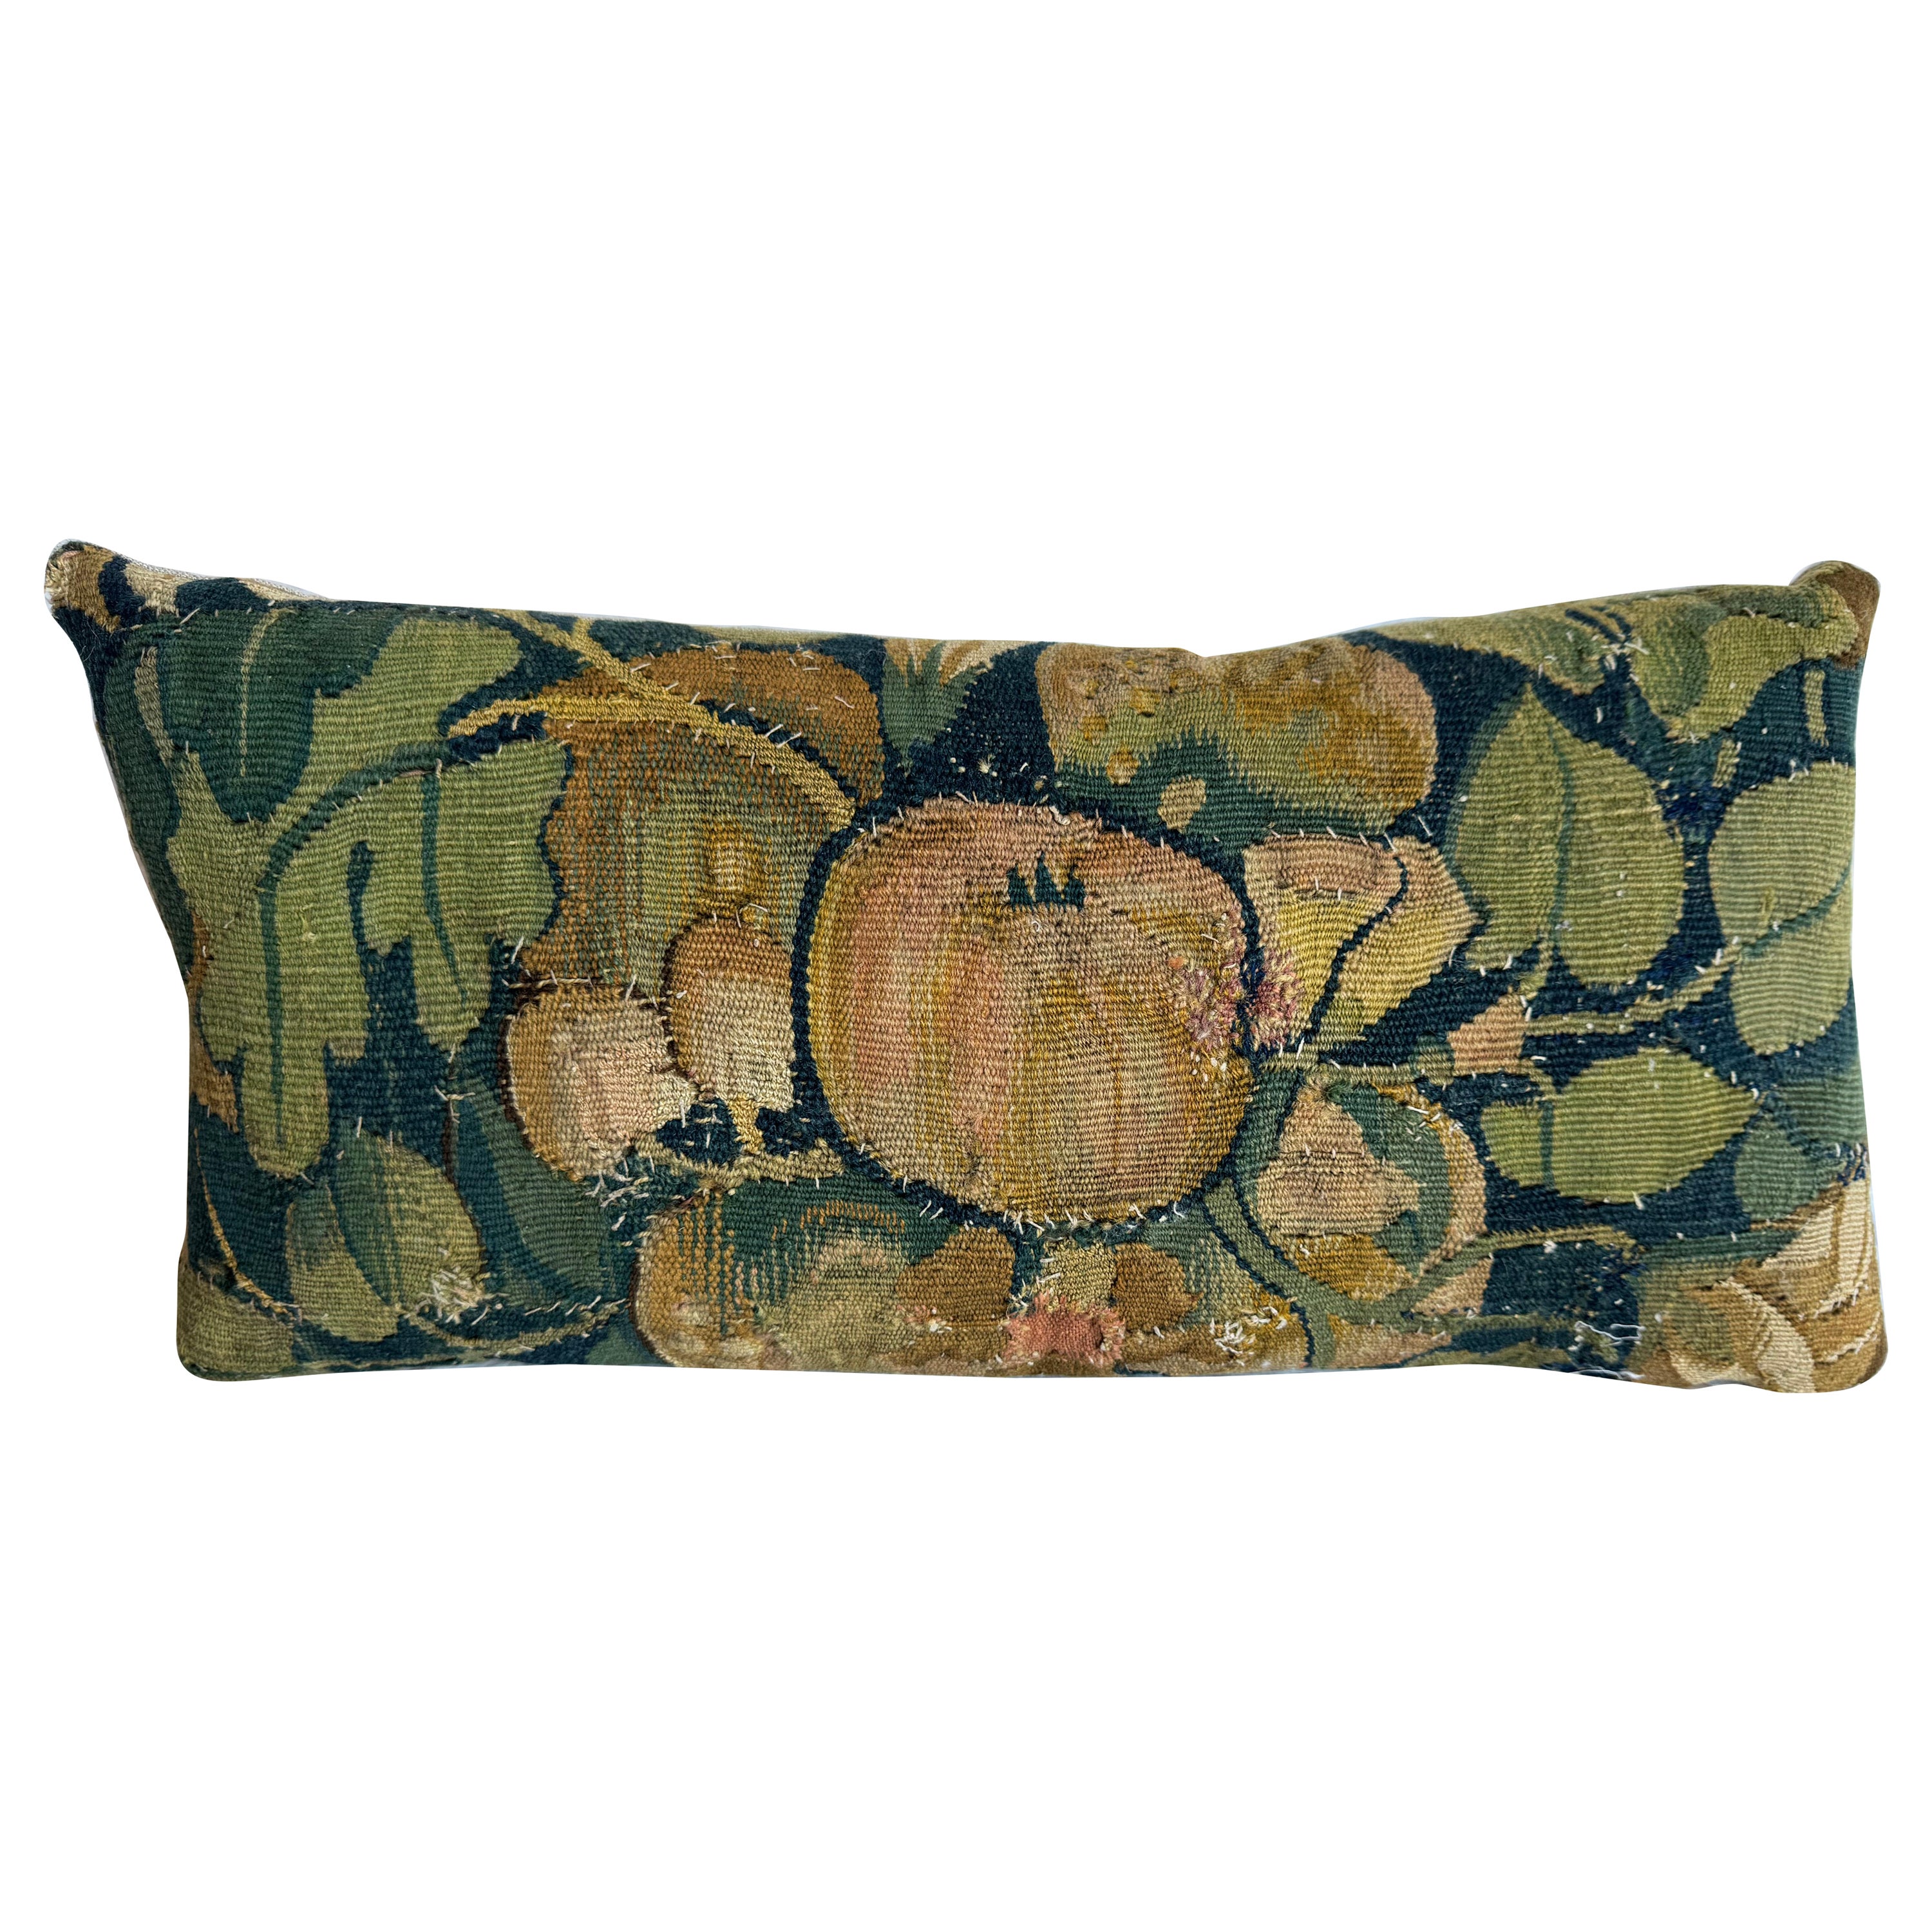  Brussels 16th Century Pillow - 20"x10" For Sale